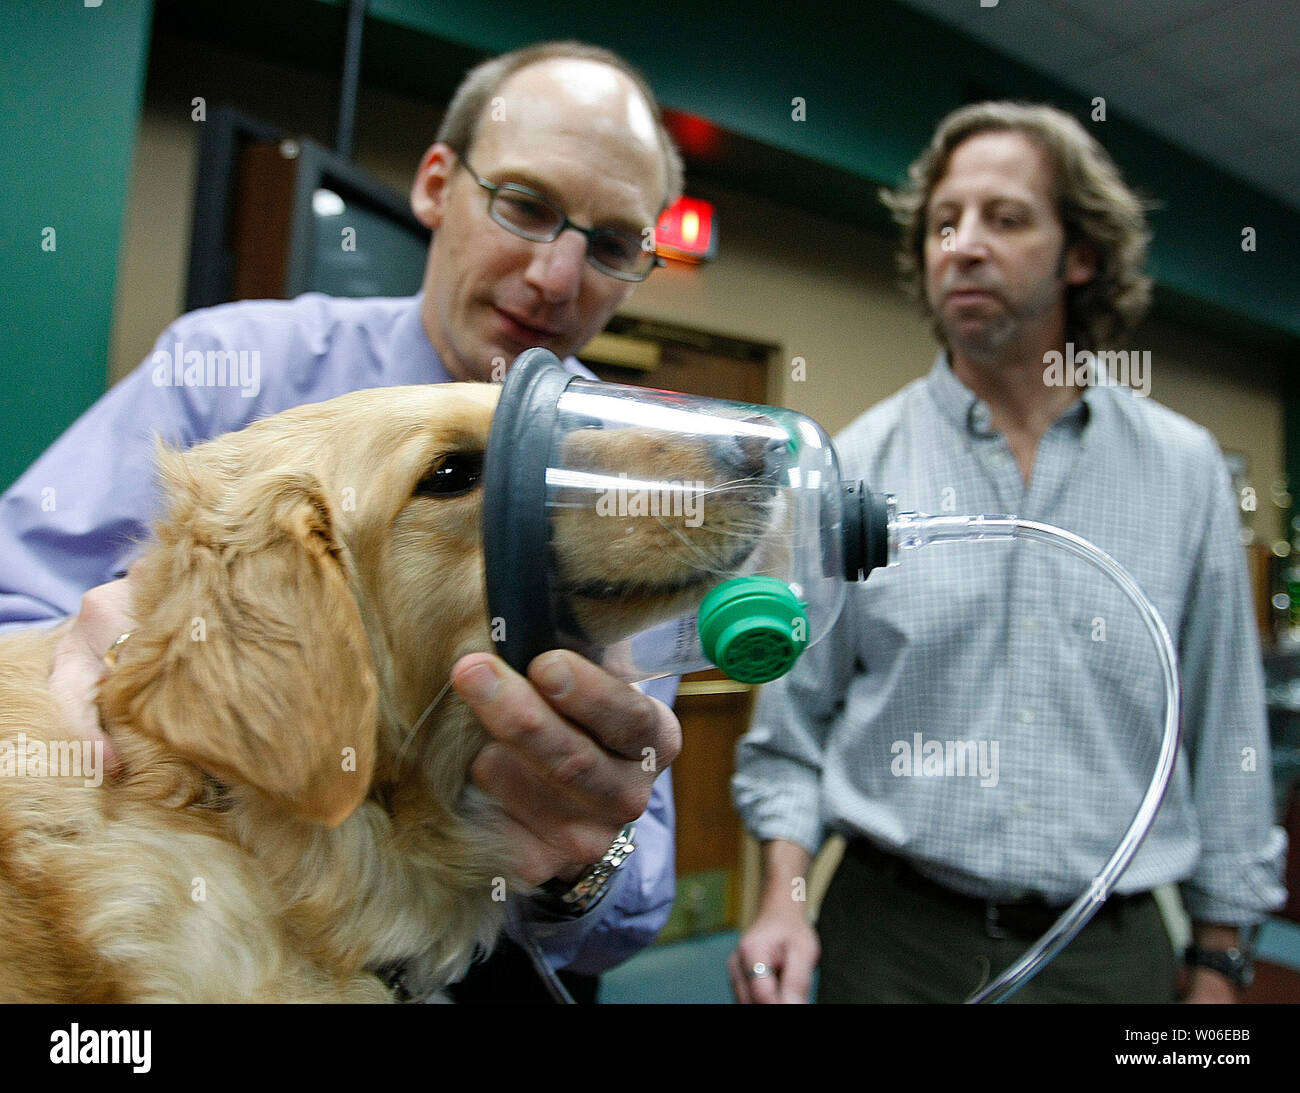 Jeff Jensen demonstrates the new pet oxygen mask on Foster the dog while friend Matt Brazelton (R) looks on after their donation of 36 sets of pet oxygen masks to the St. Louis Fire Department in St. Louis on April 16, 2008. Jensen and Brazelton, co-owners of Four Muddy Paws, a self-service dog washing service in St. Louis, donated the masks, enough for each frontline fire apparatus. Each set contains three masks which are designed for large or small dogs, cats and ferrets.   (UPI Photo/Bill Greenblatt) Stock Photo